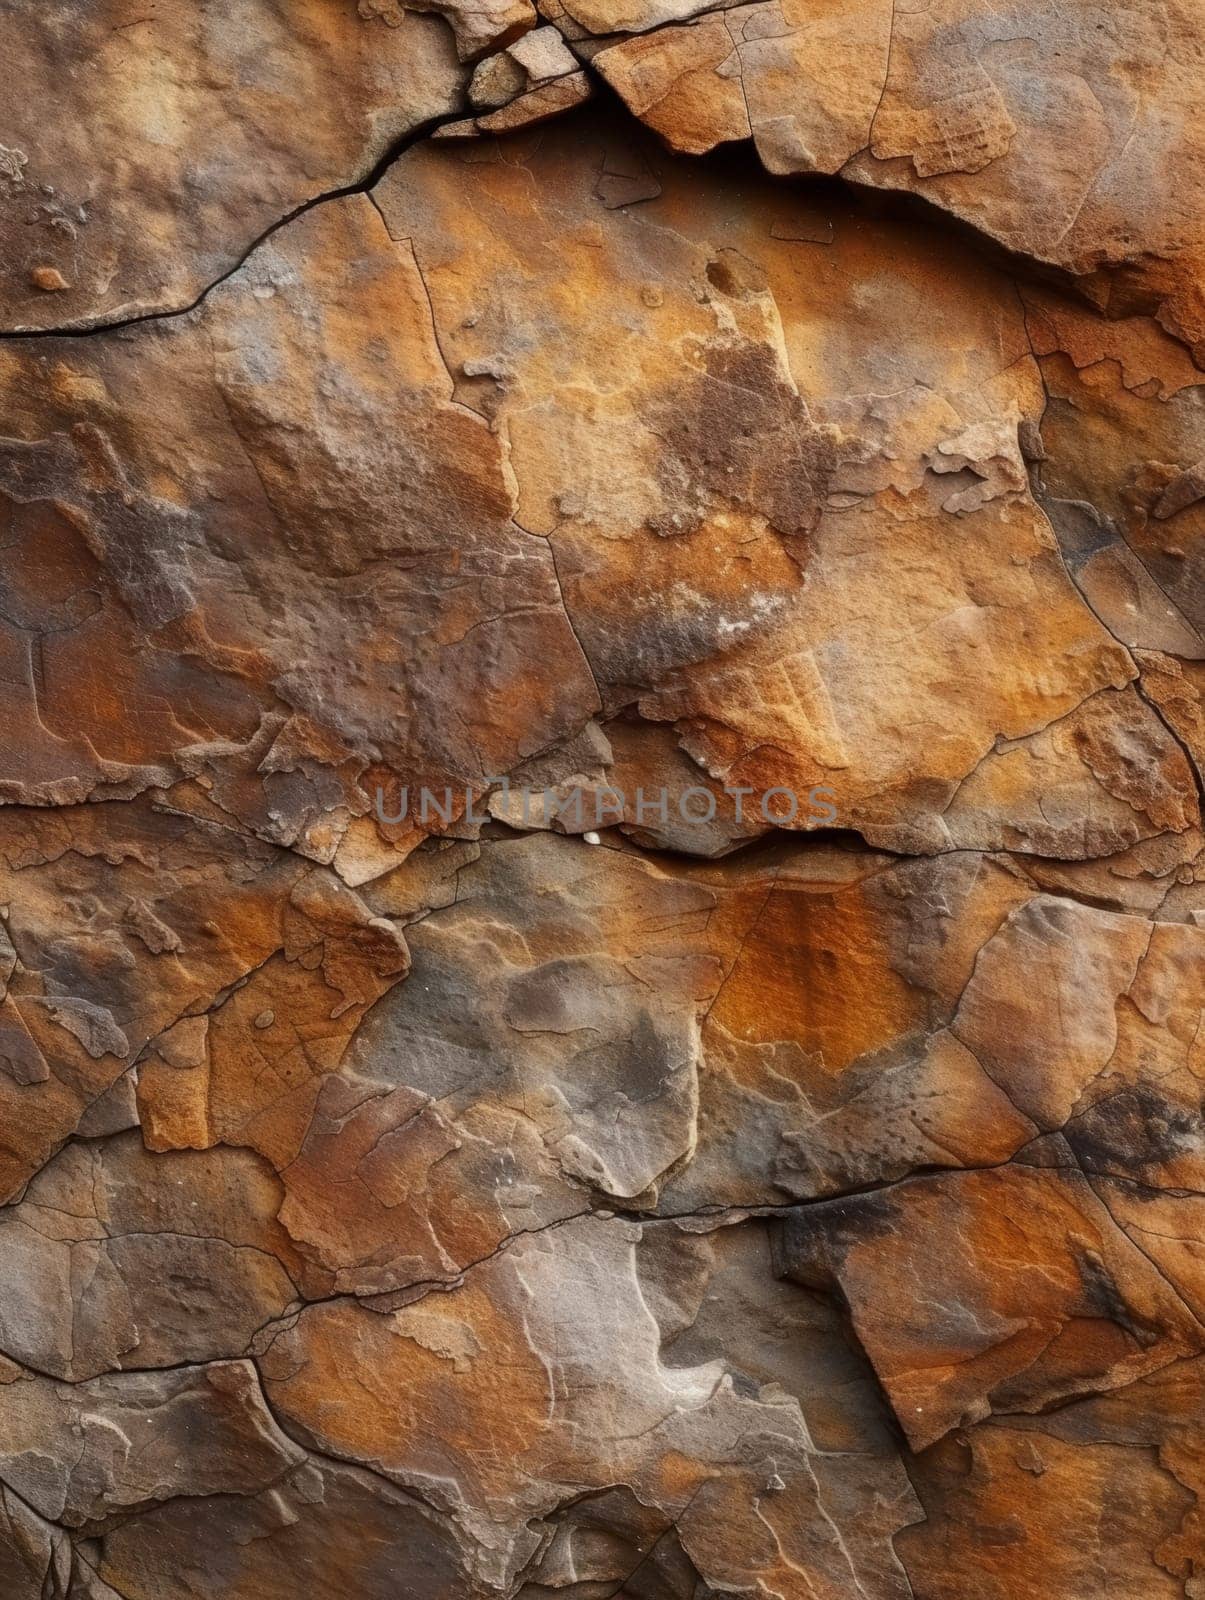 Close-up view of a multicolored rock surface showcasing natural textures and patterns. by sfinks